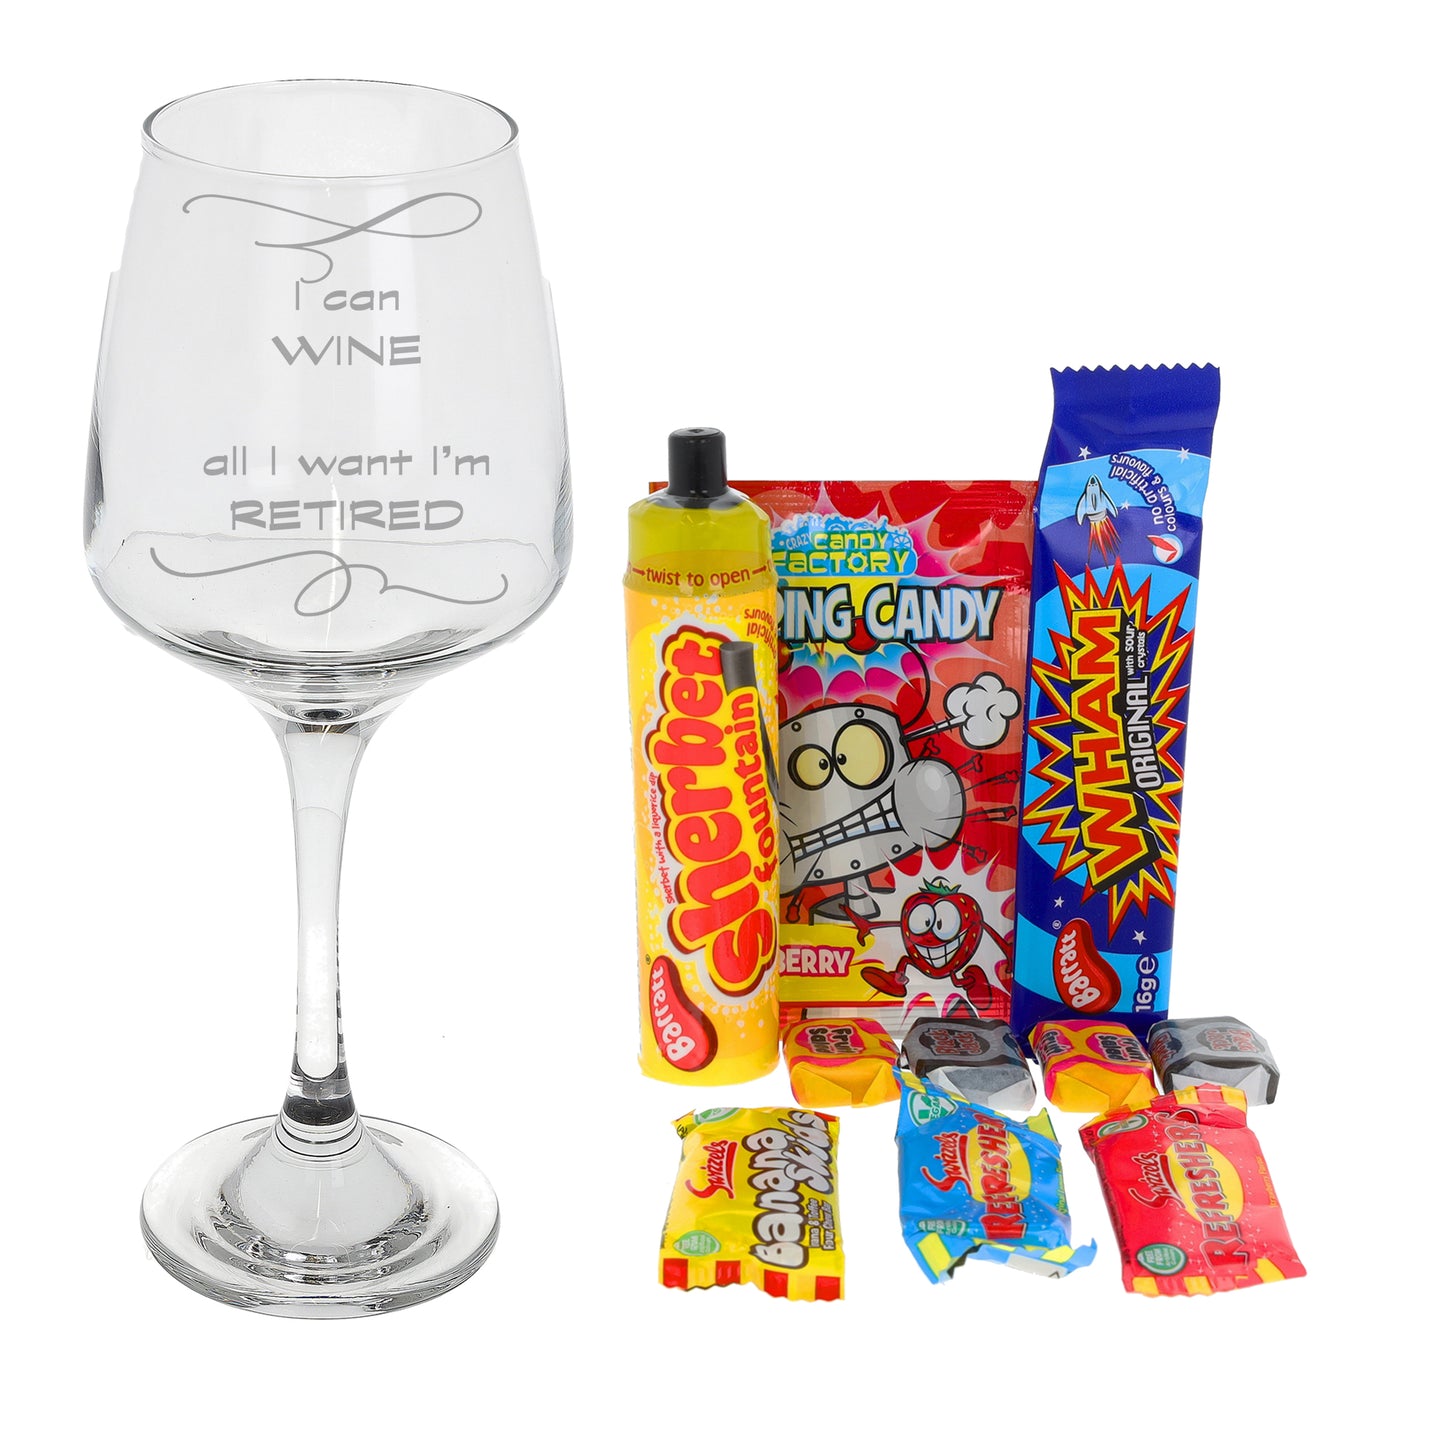 Personalised Engraved Wine Glass Retirement Gift  - Always Looking Good - Filled- Retro Sweets  